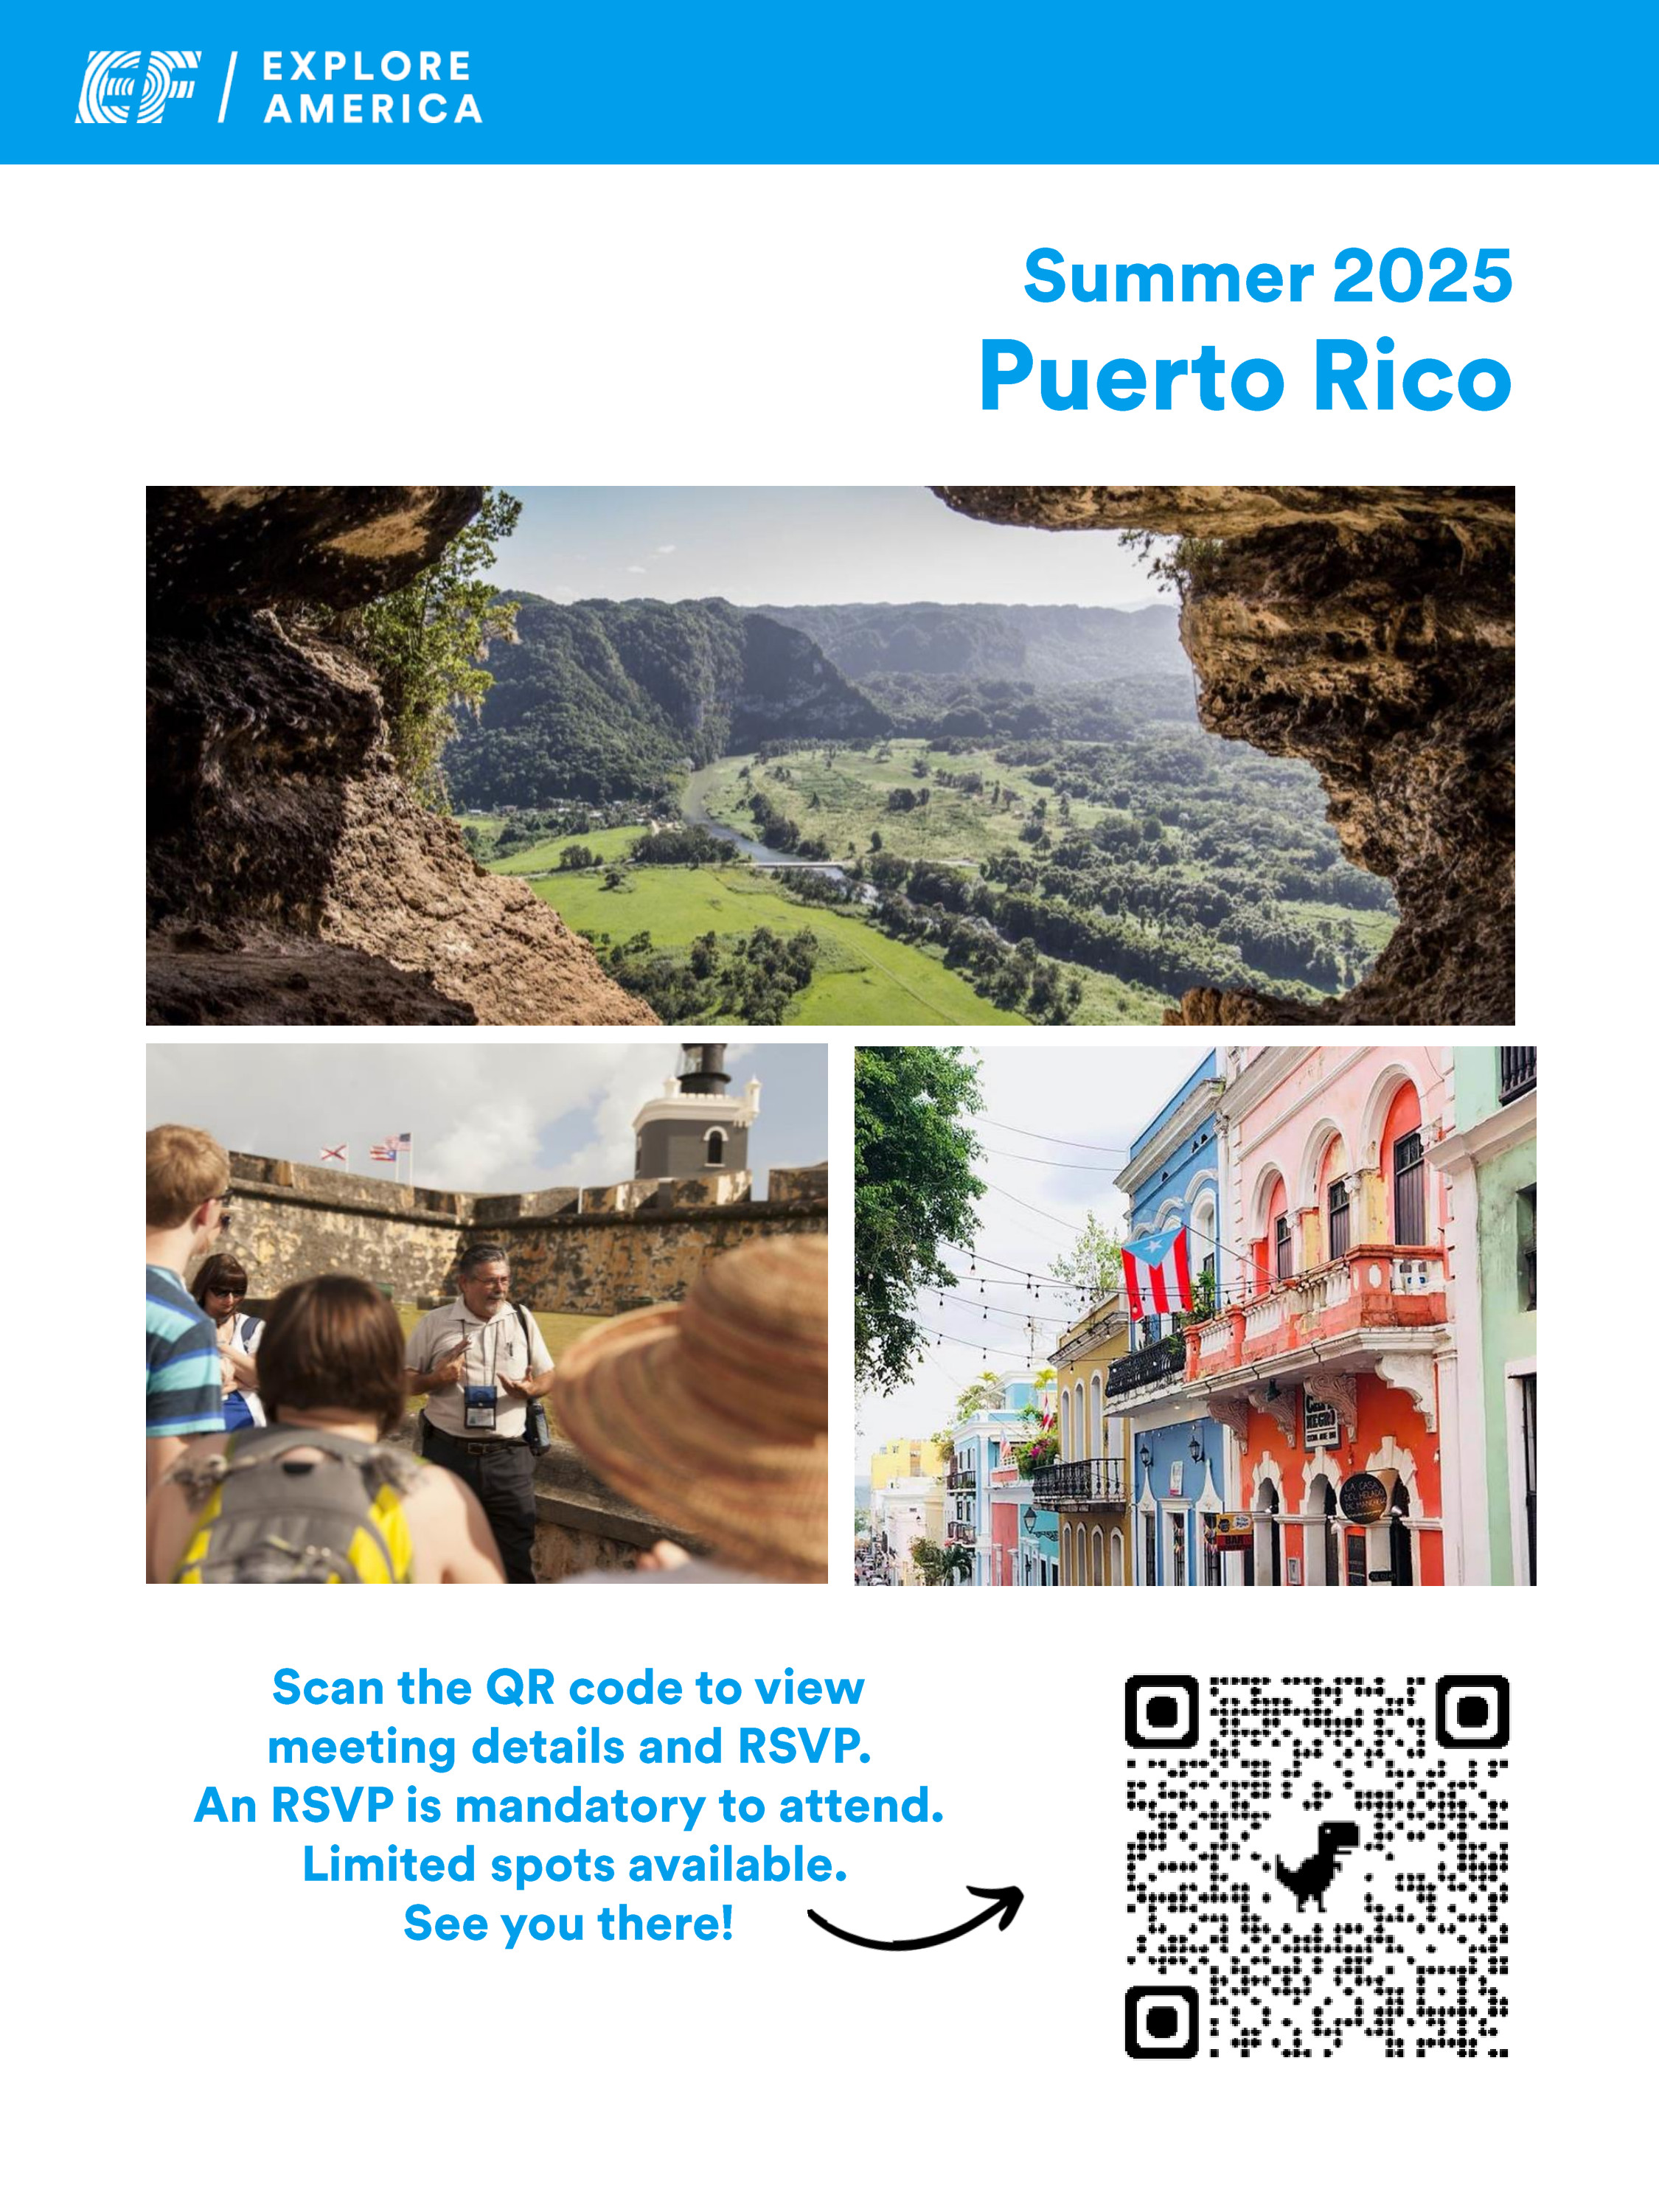 summer 2025 Puerto Rico trip for middle school flyer with QR code